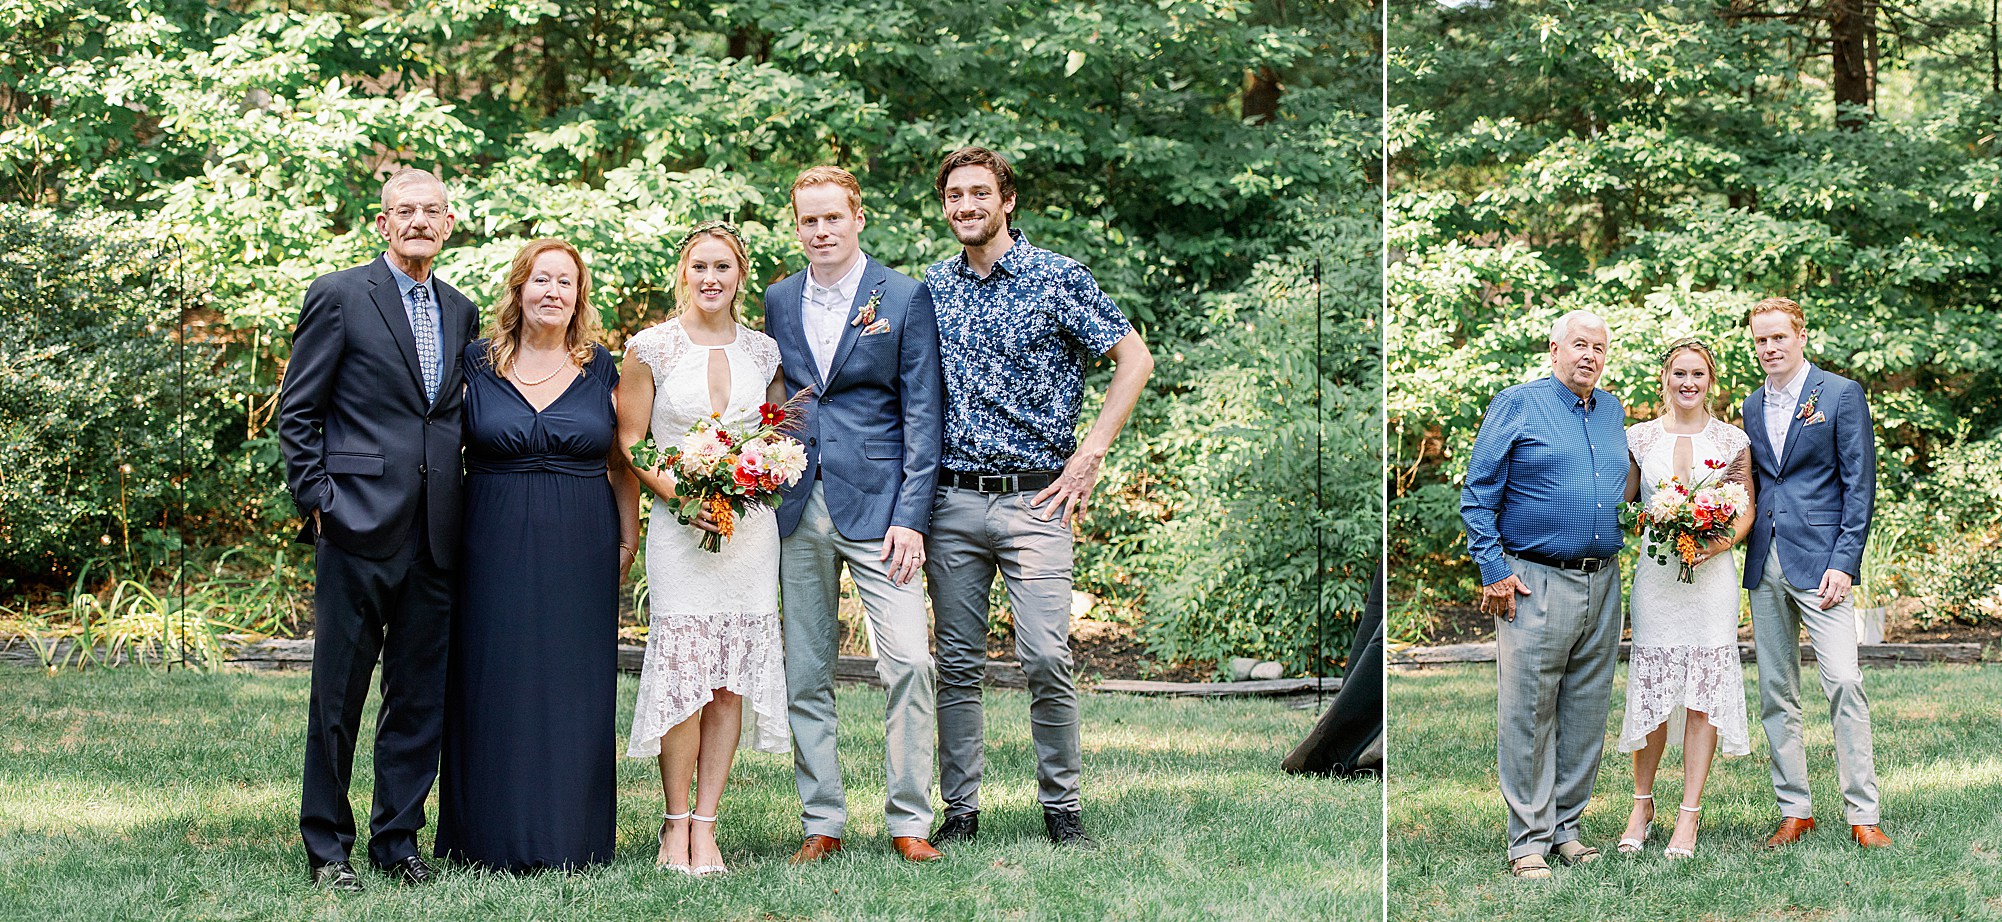 family portraits at micro wedding in couples backyard